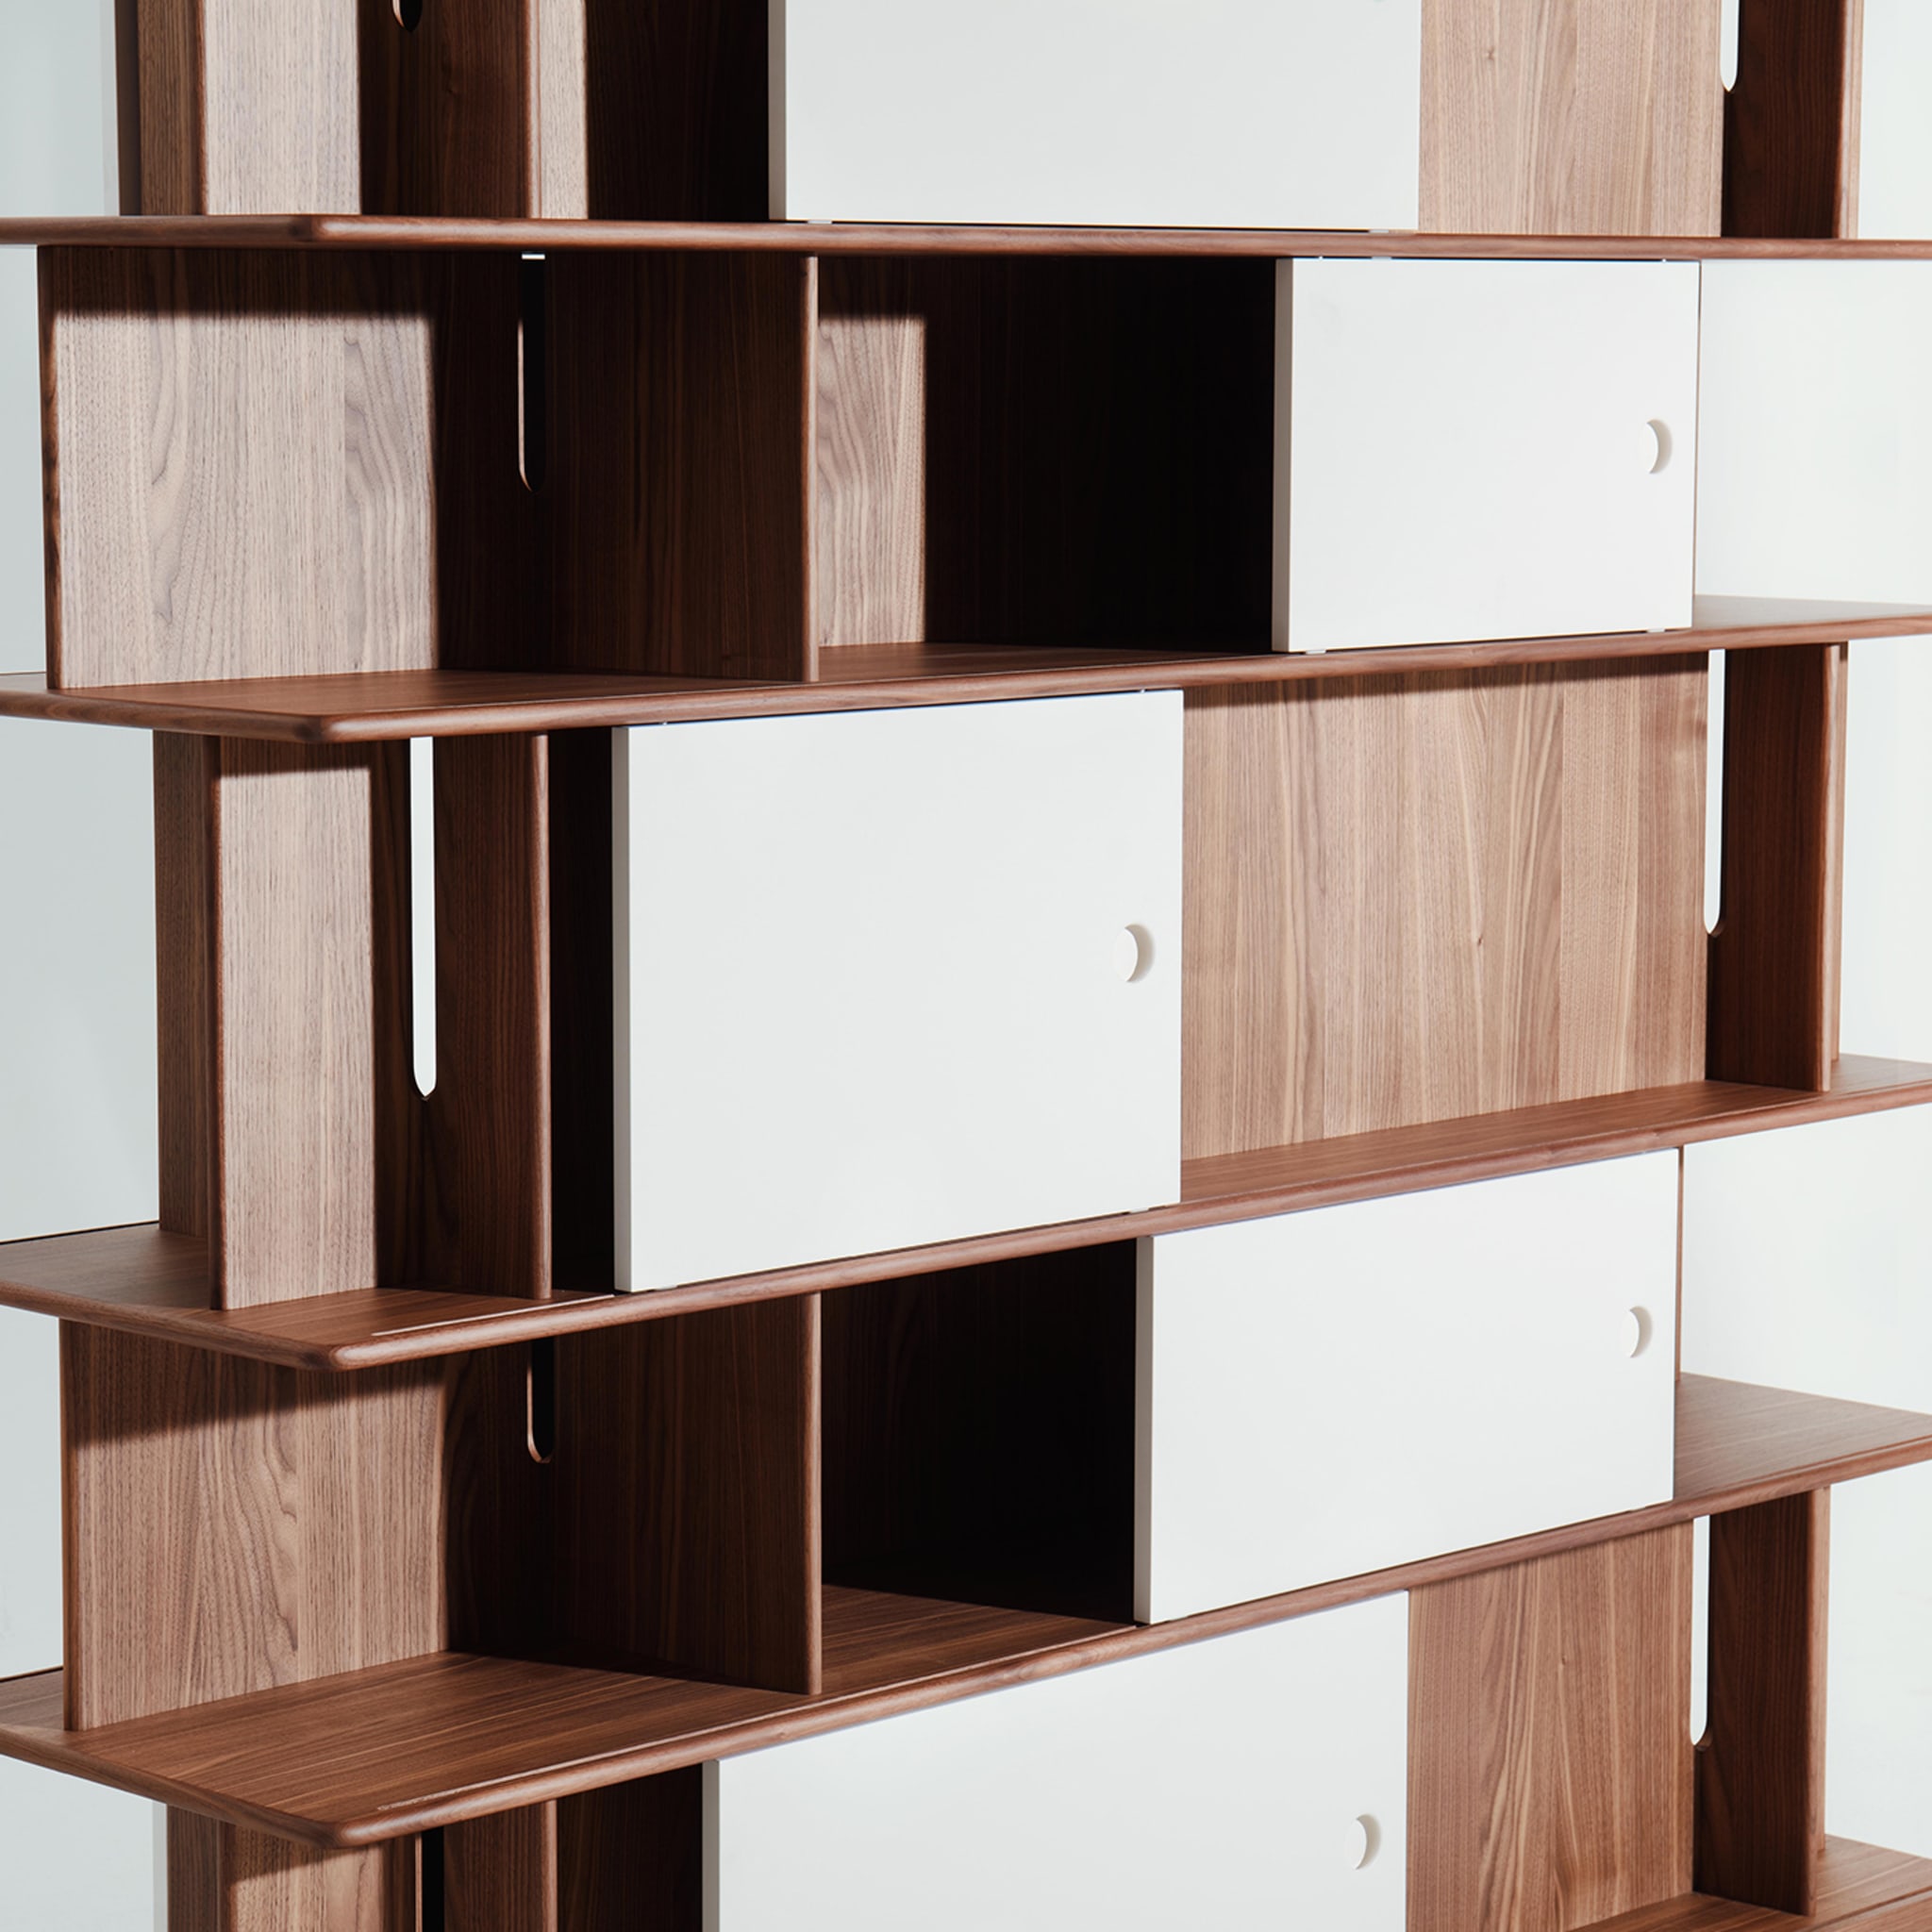 Intersection Large Bookcase by Neri&Hu - Alternative view 2